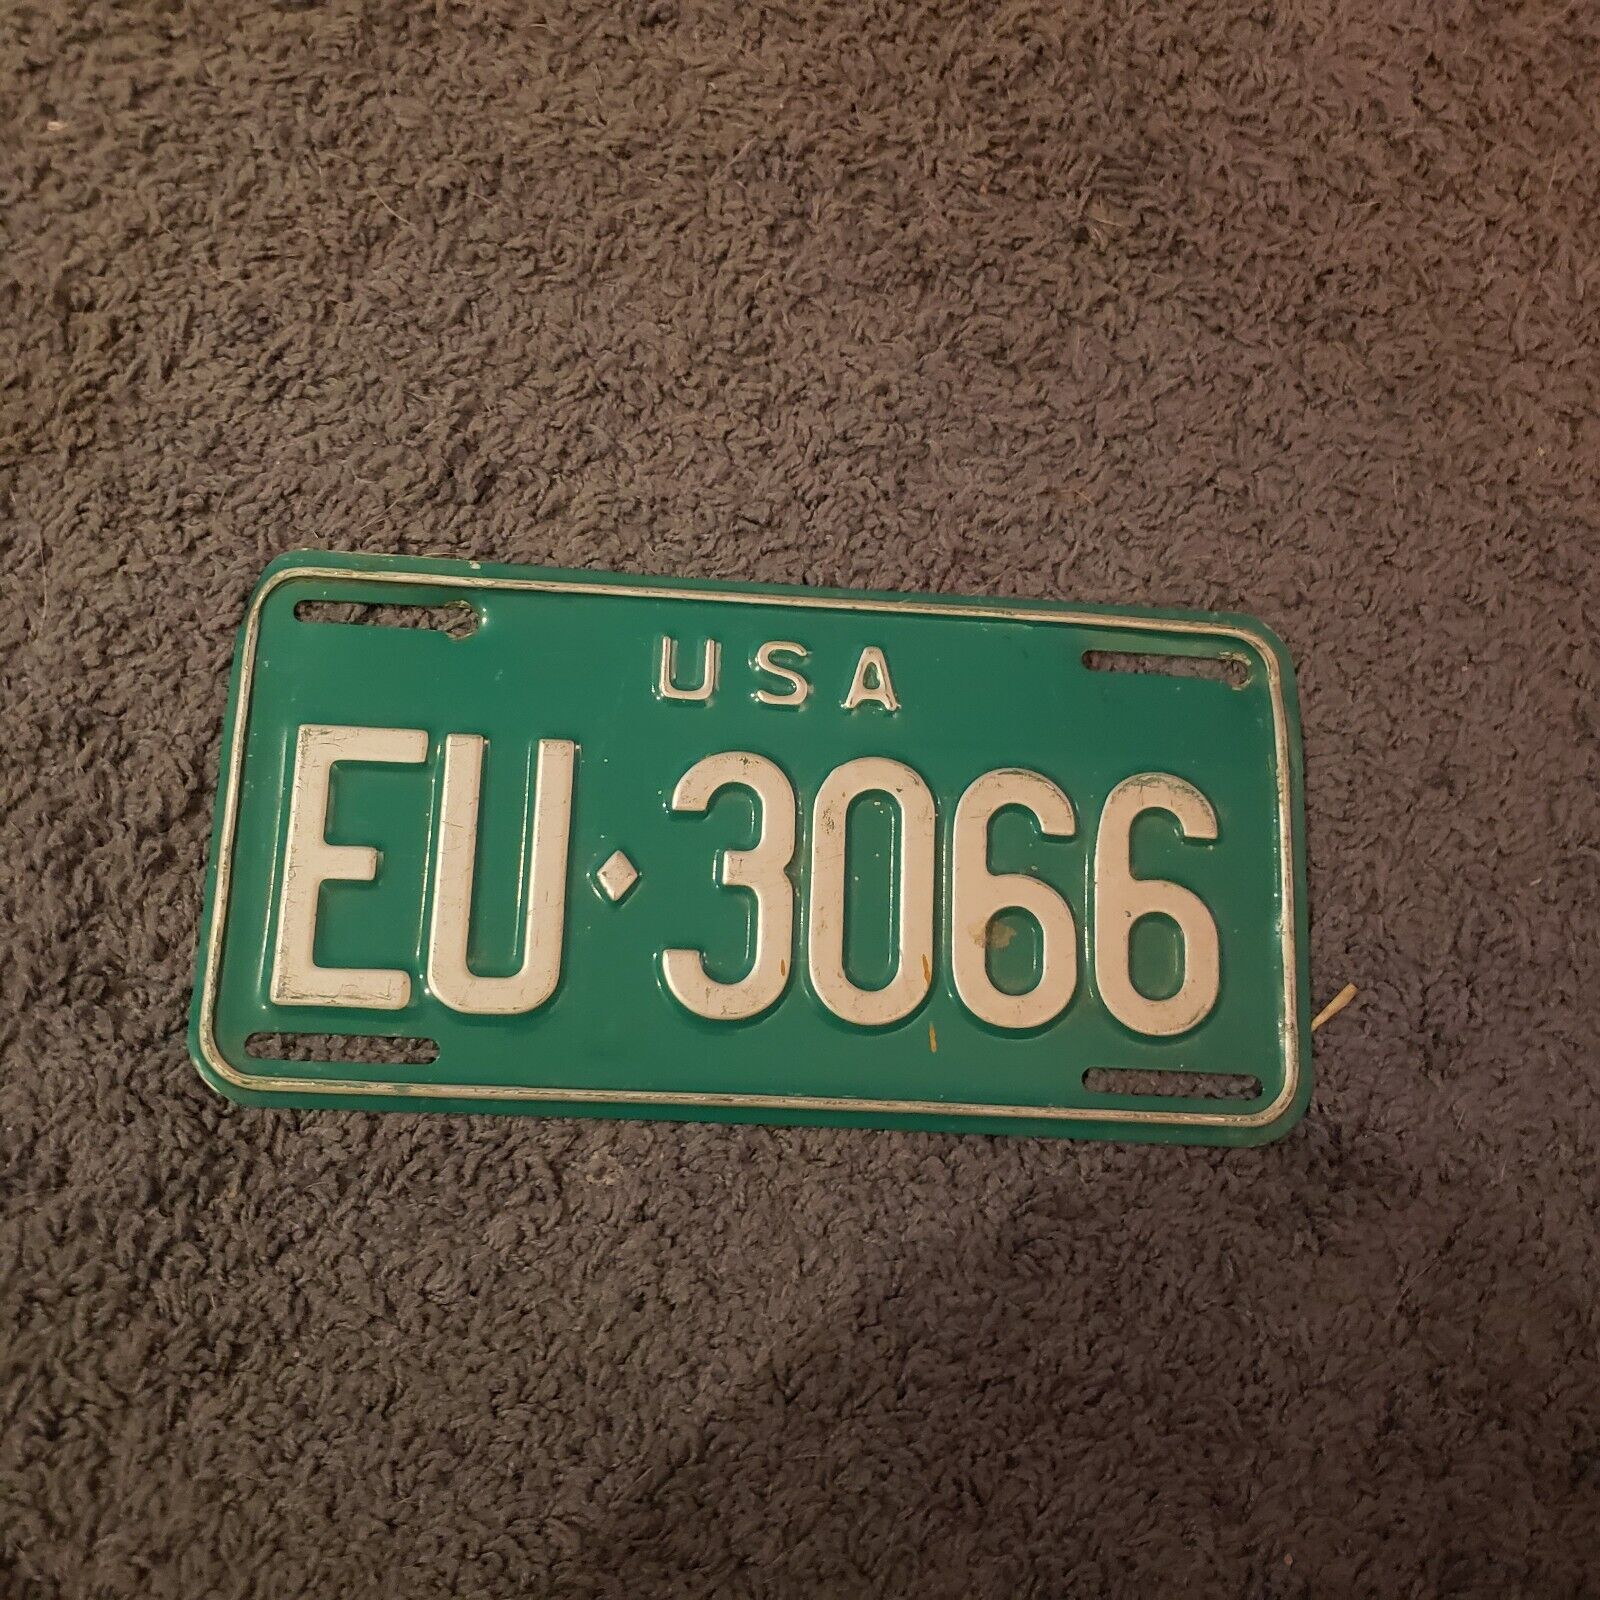 USA EUROPEAN LICENSEPLATE IN EUROPE FROM 1966 THRU THE 70\'S FROM INFO ON WEBSITE